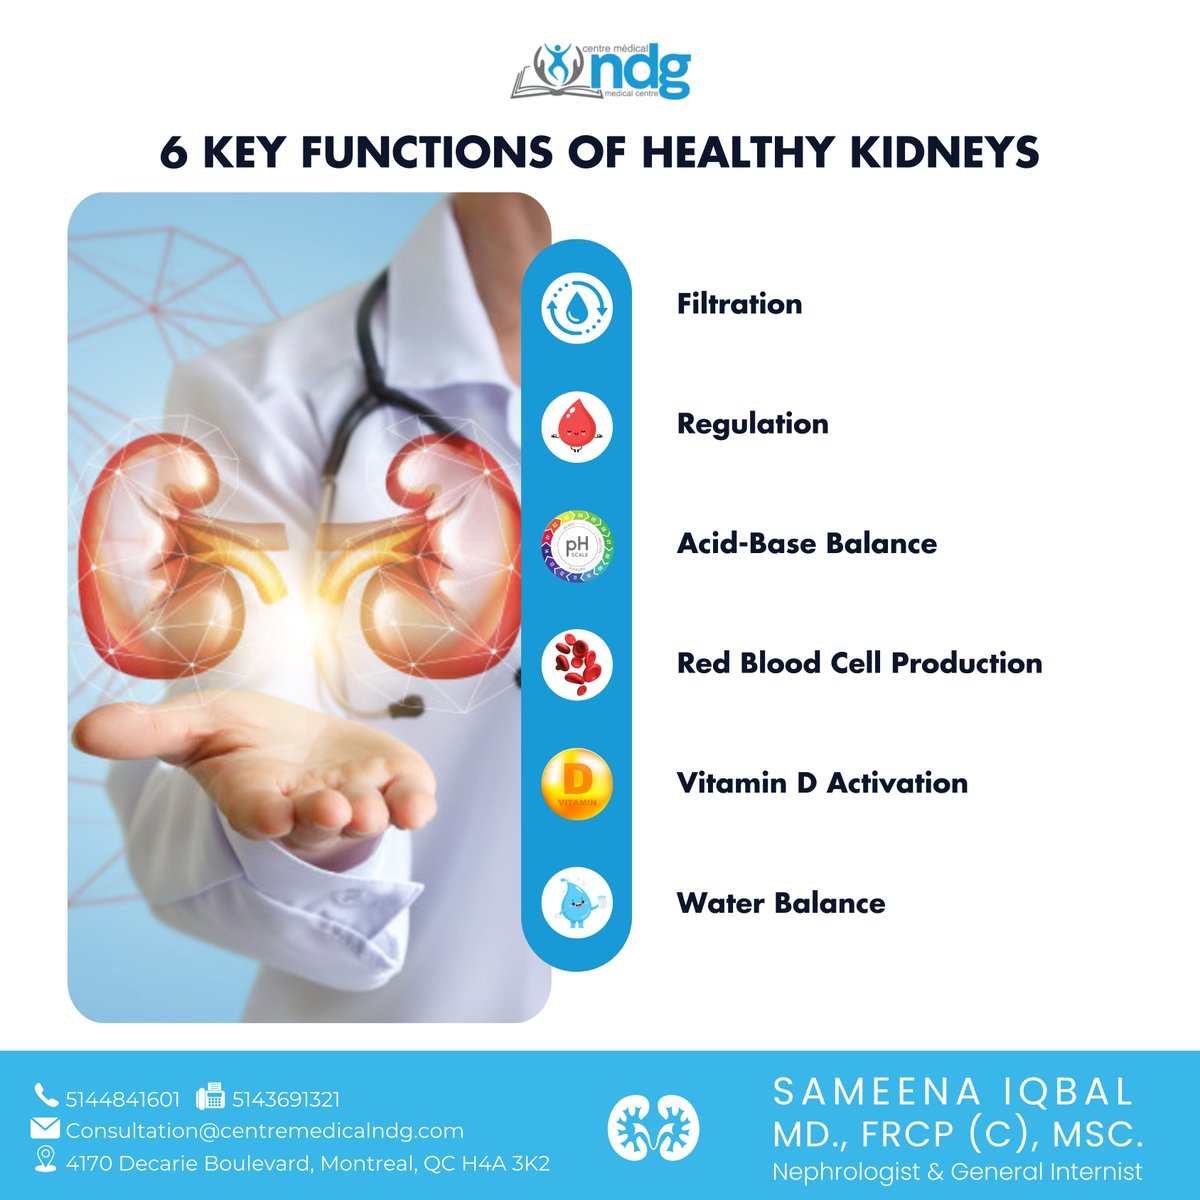 Discover the essential functions of healthy kidneys! 🌟 Here's what they do:

Filtration
Regulation
Acid-Base Balance
Red Blood Cell Production
Vitamin D Activation
Water Balance

#KidneyHealth #HealthyKidneys #StayHydrated #KnowYourBody #BoneHealth #BodyBalance #KidneyFunction